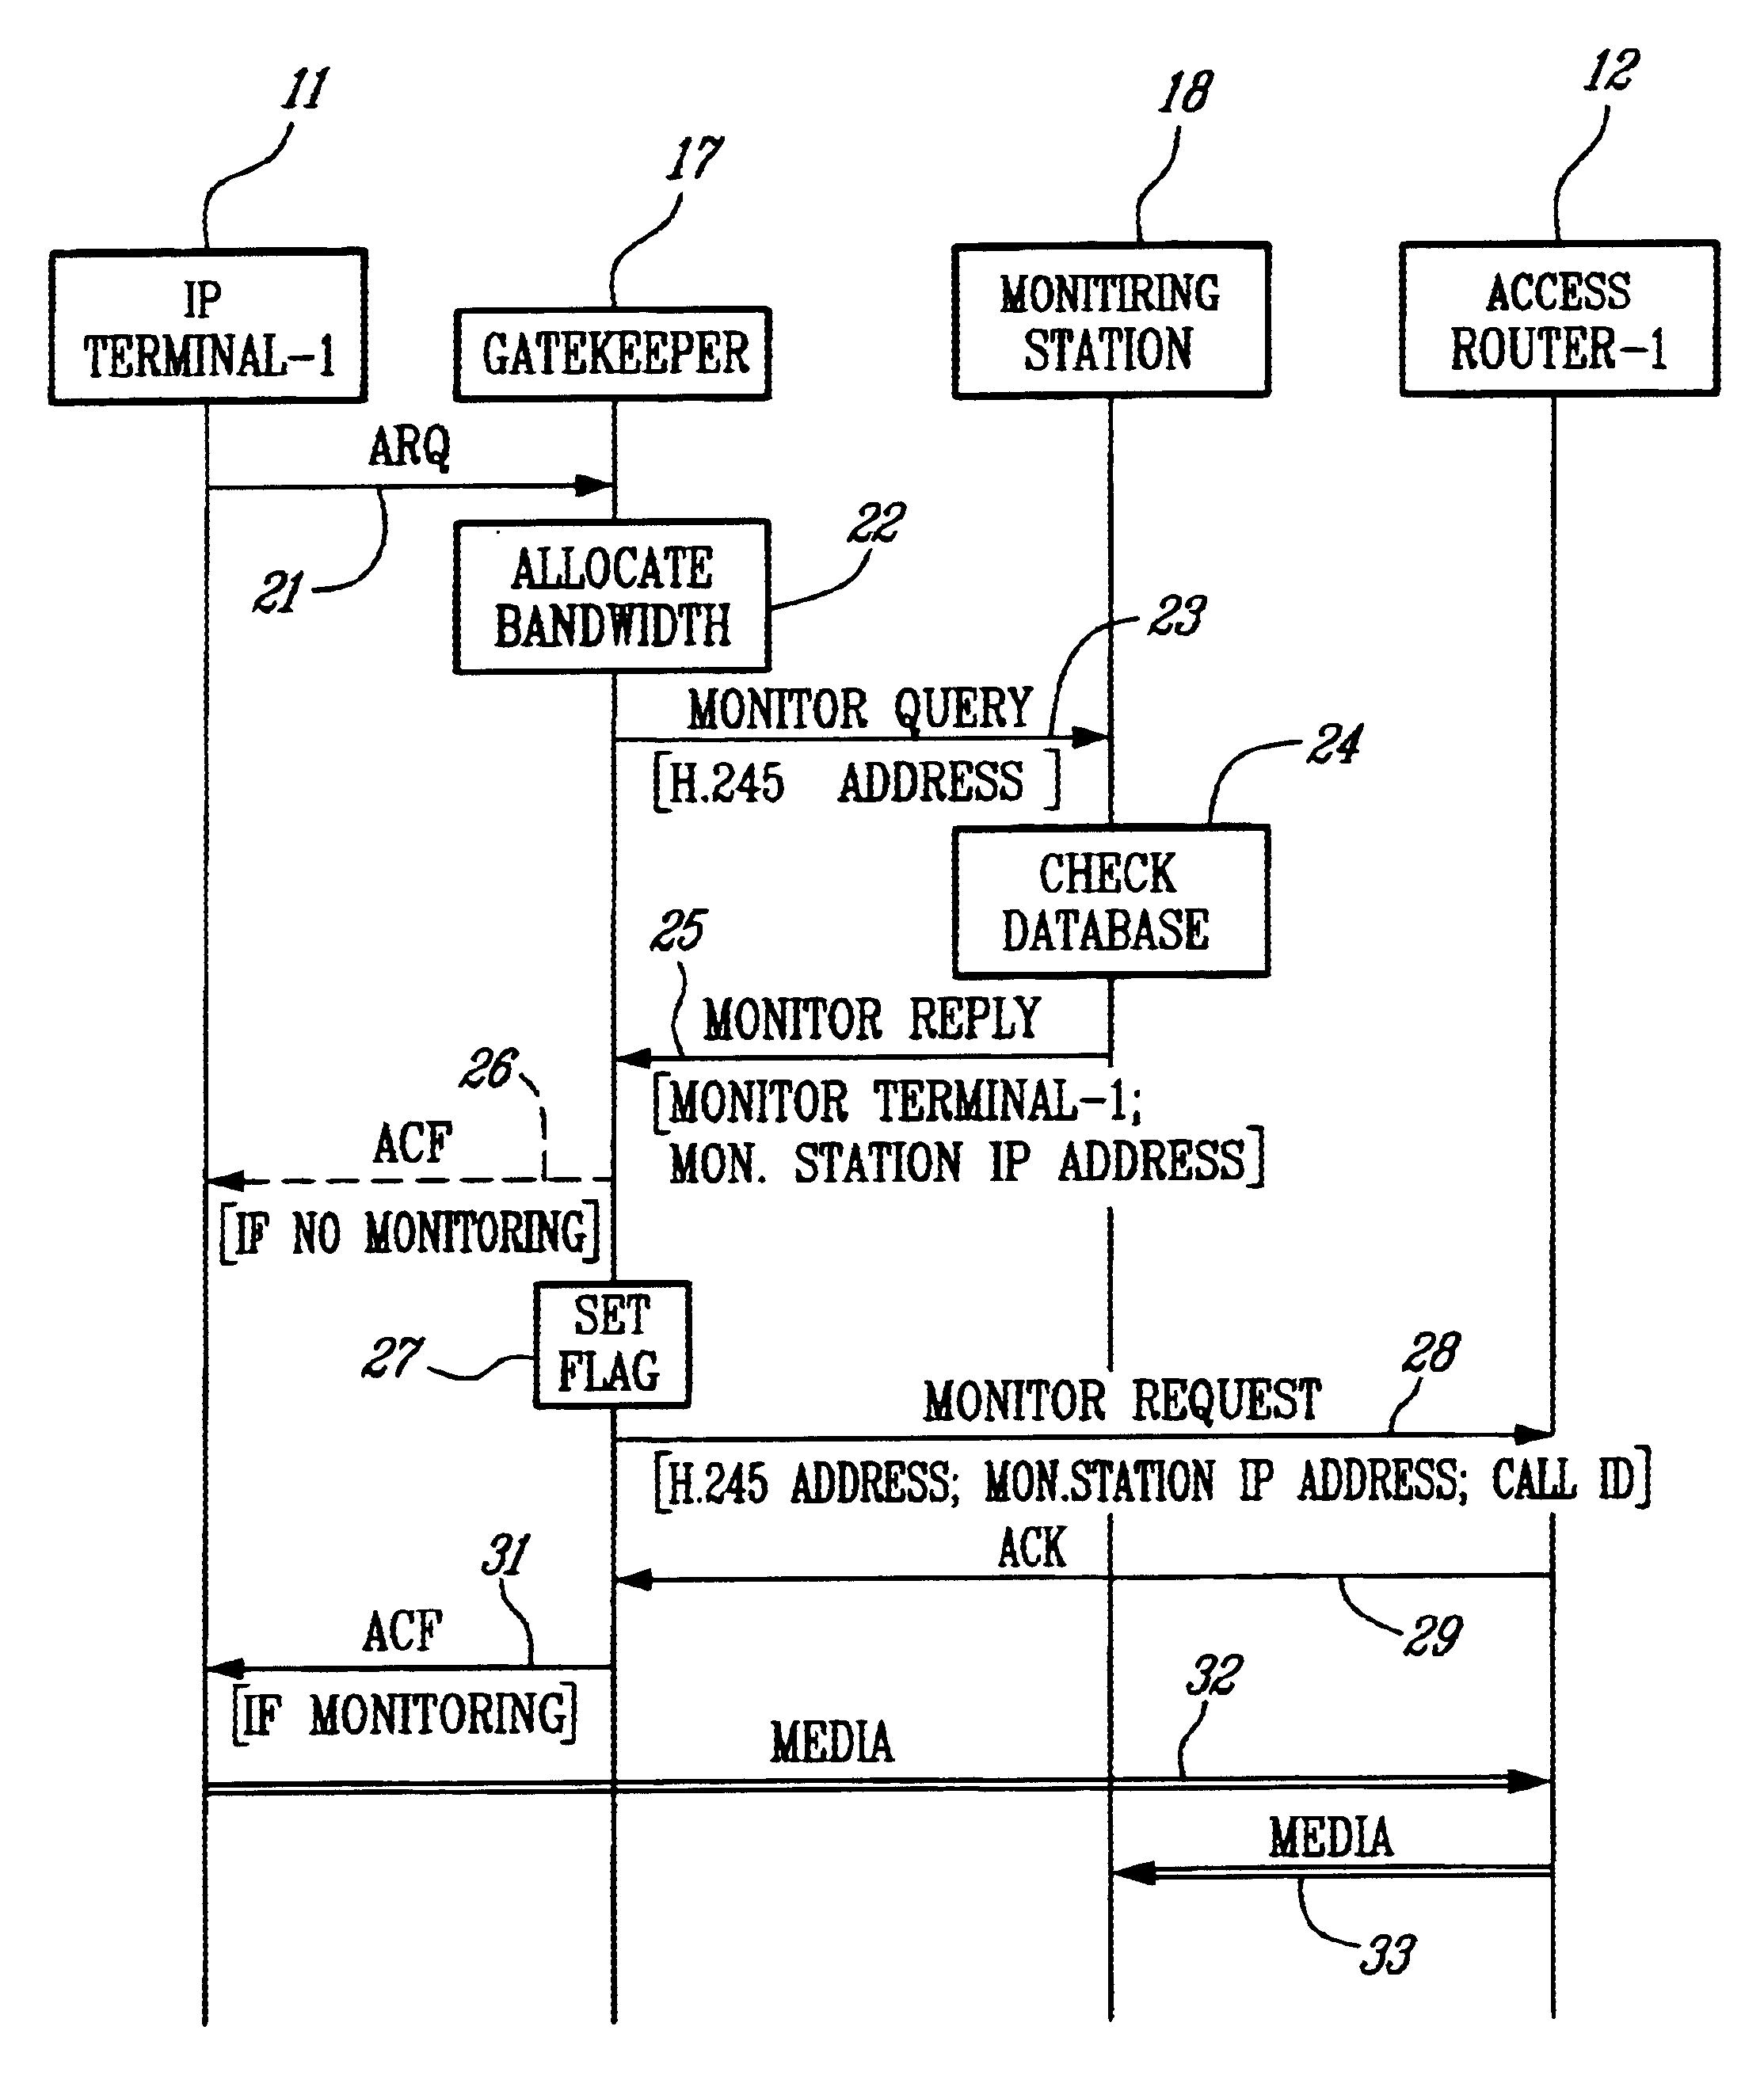 Method of monitoring calls in an internet protocol (IP)-based network